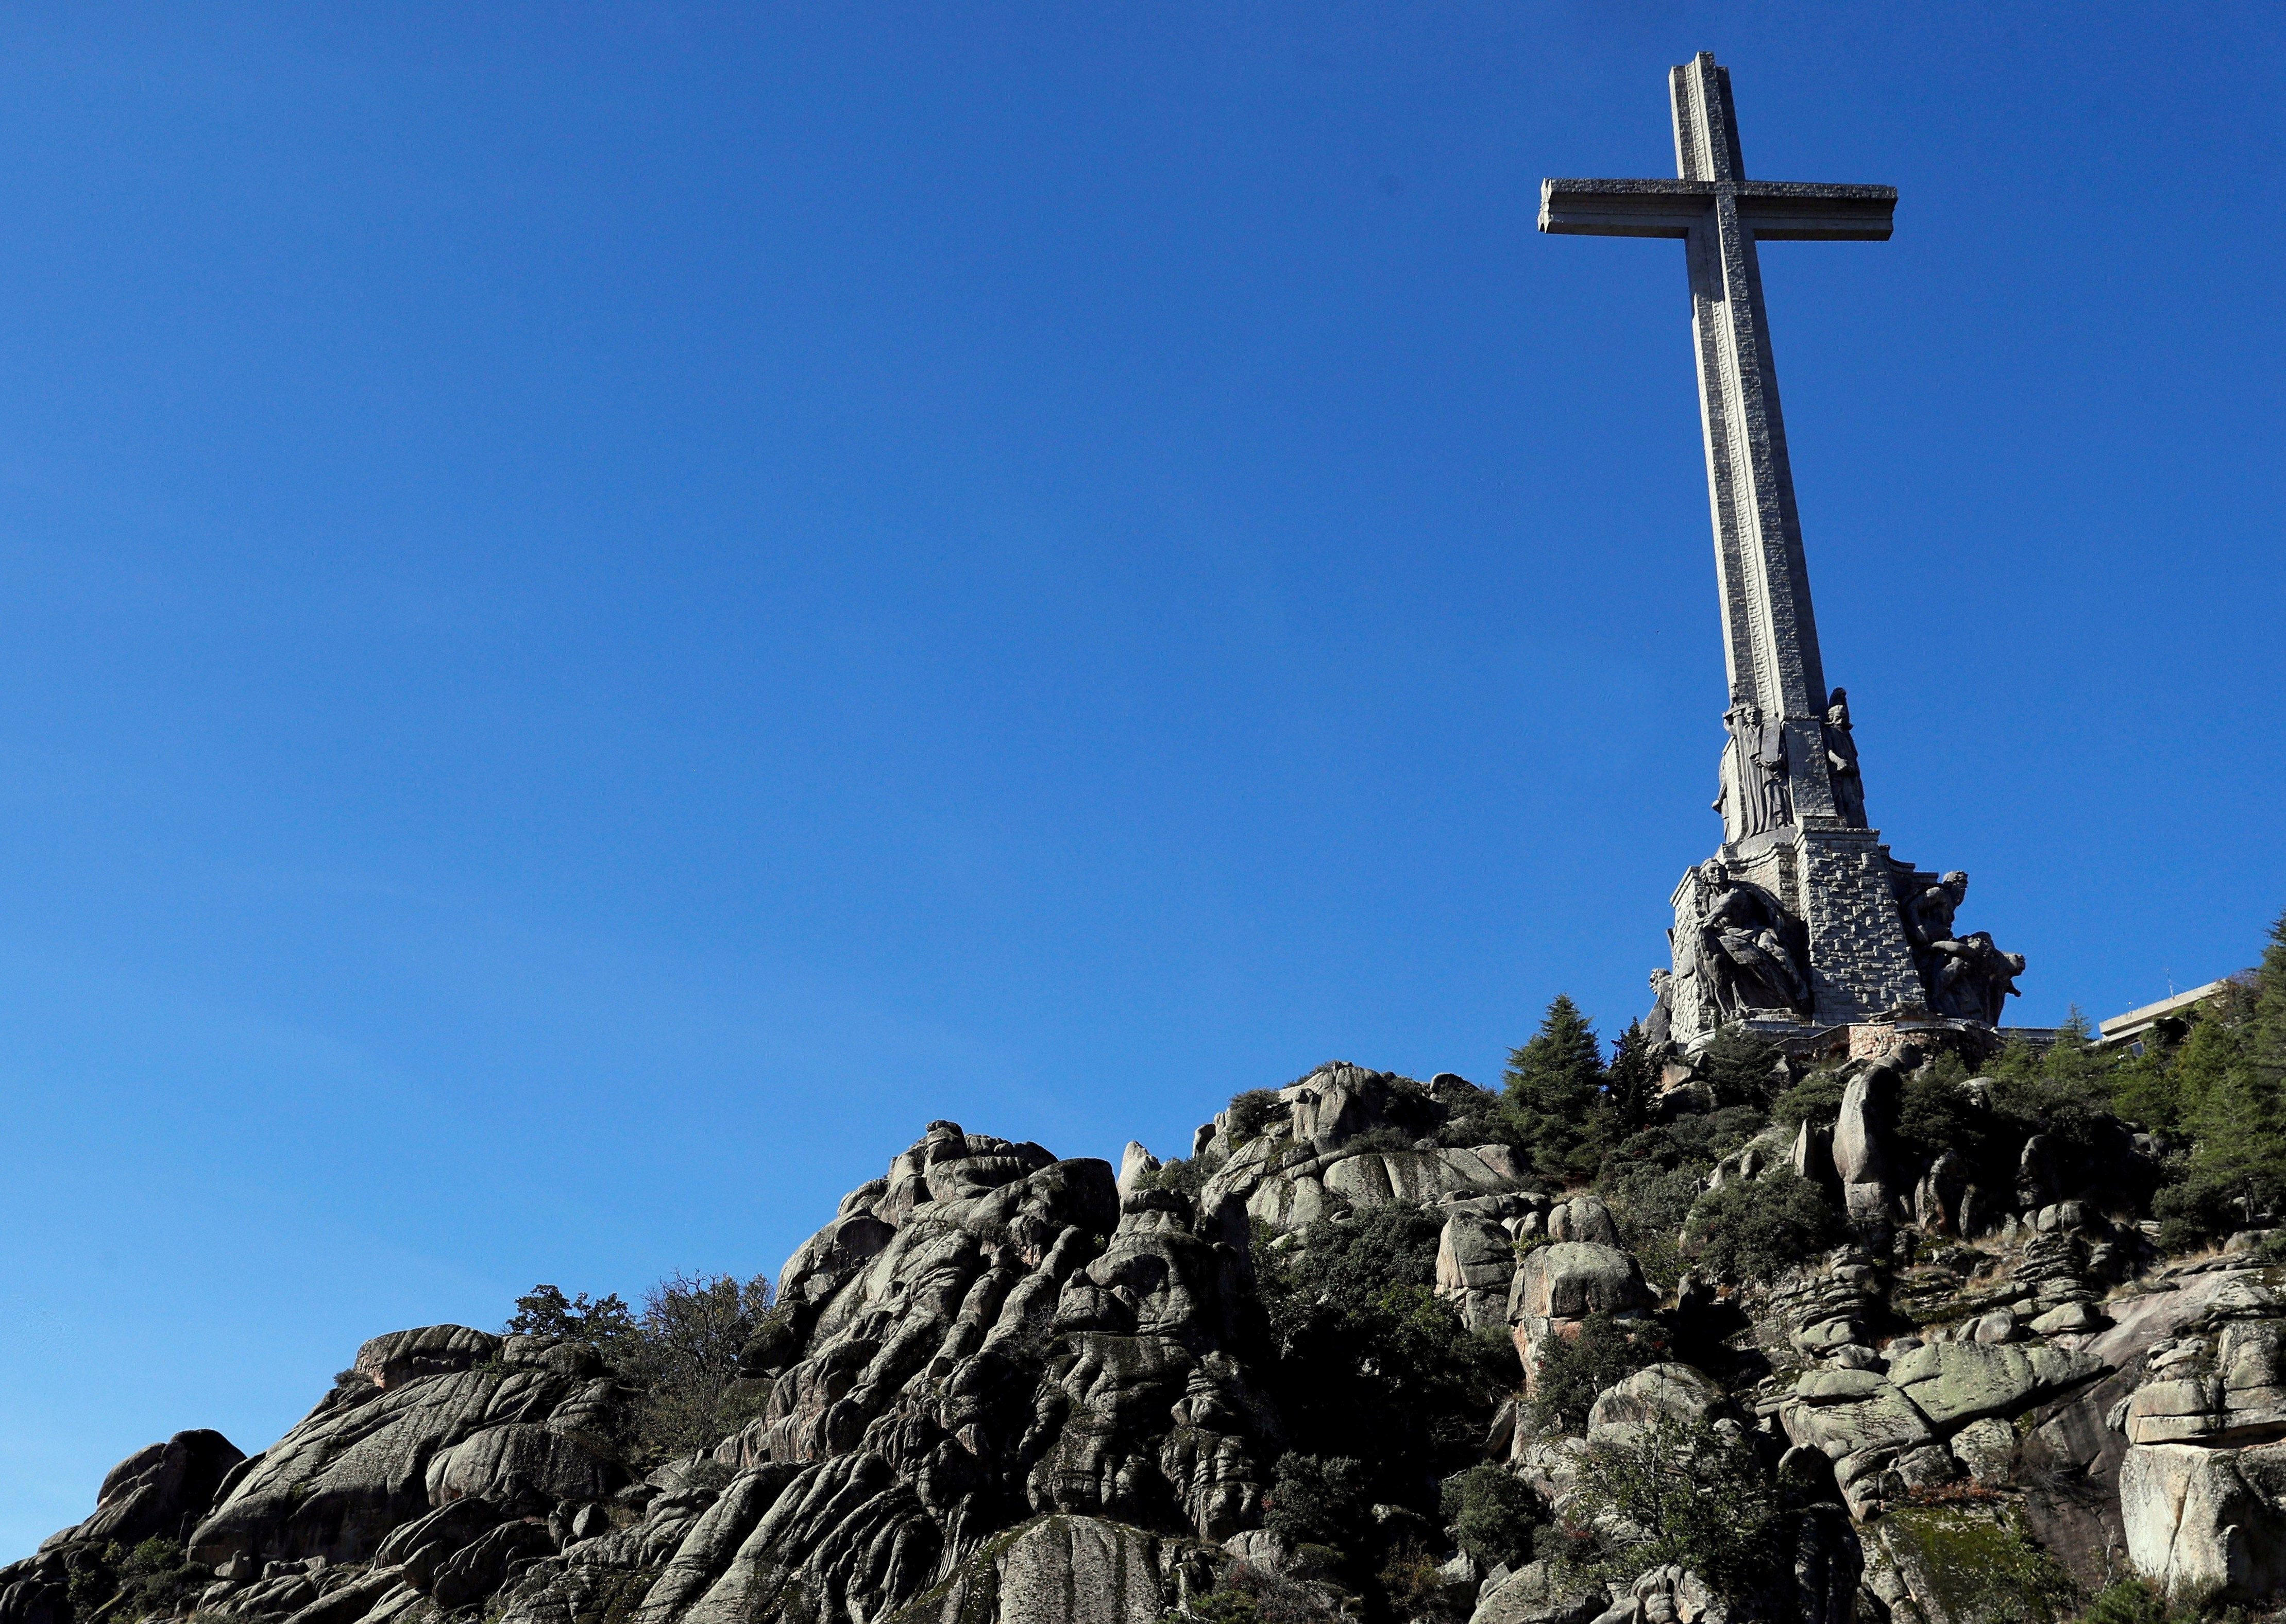 A helicopter carrying the coffin of former Spanish dictator Gen. Francisco Franco flies above the mausoleum where the tomb of former Spanish dictator was located in the Valley of the Fallen near Madrid before it was exhumed Oct. 24, 2019. (CNS photo/Emilio Naranjo, pool via Reuters) 